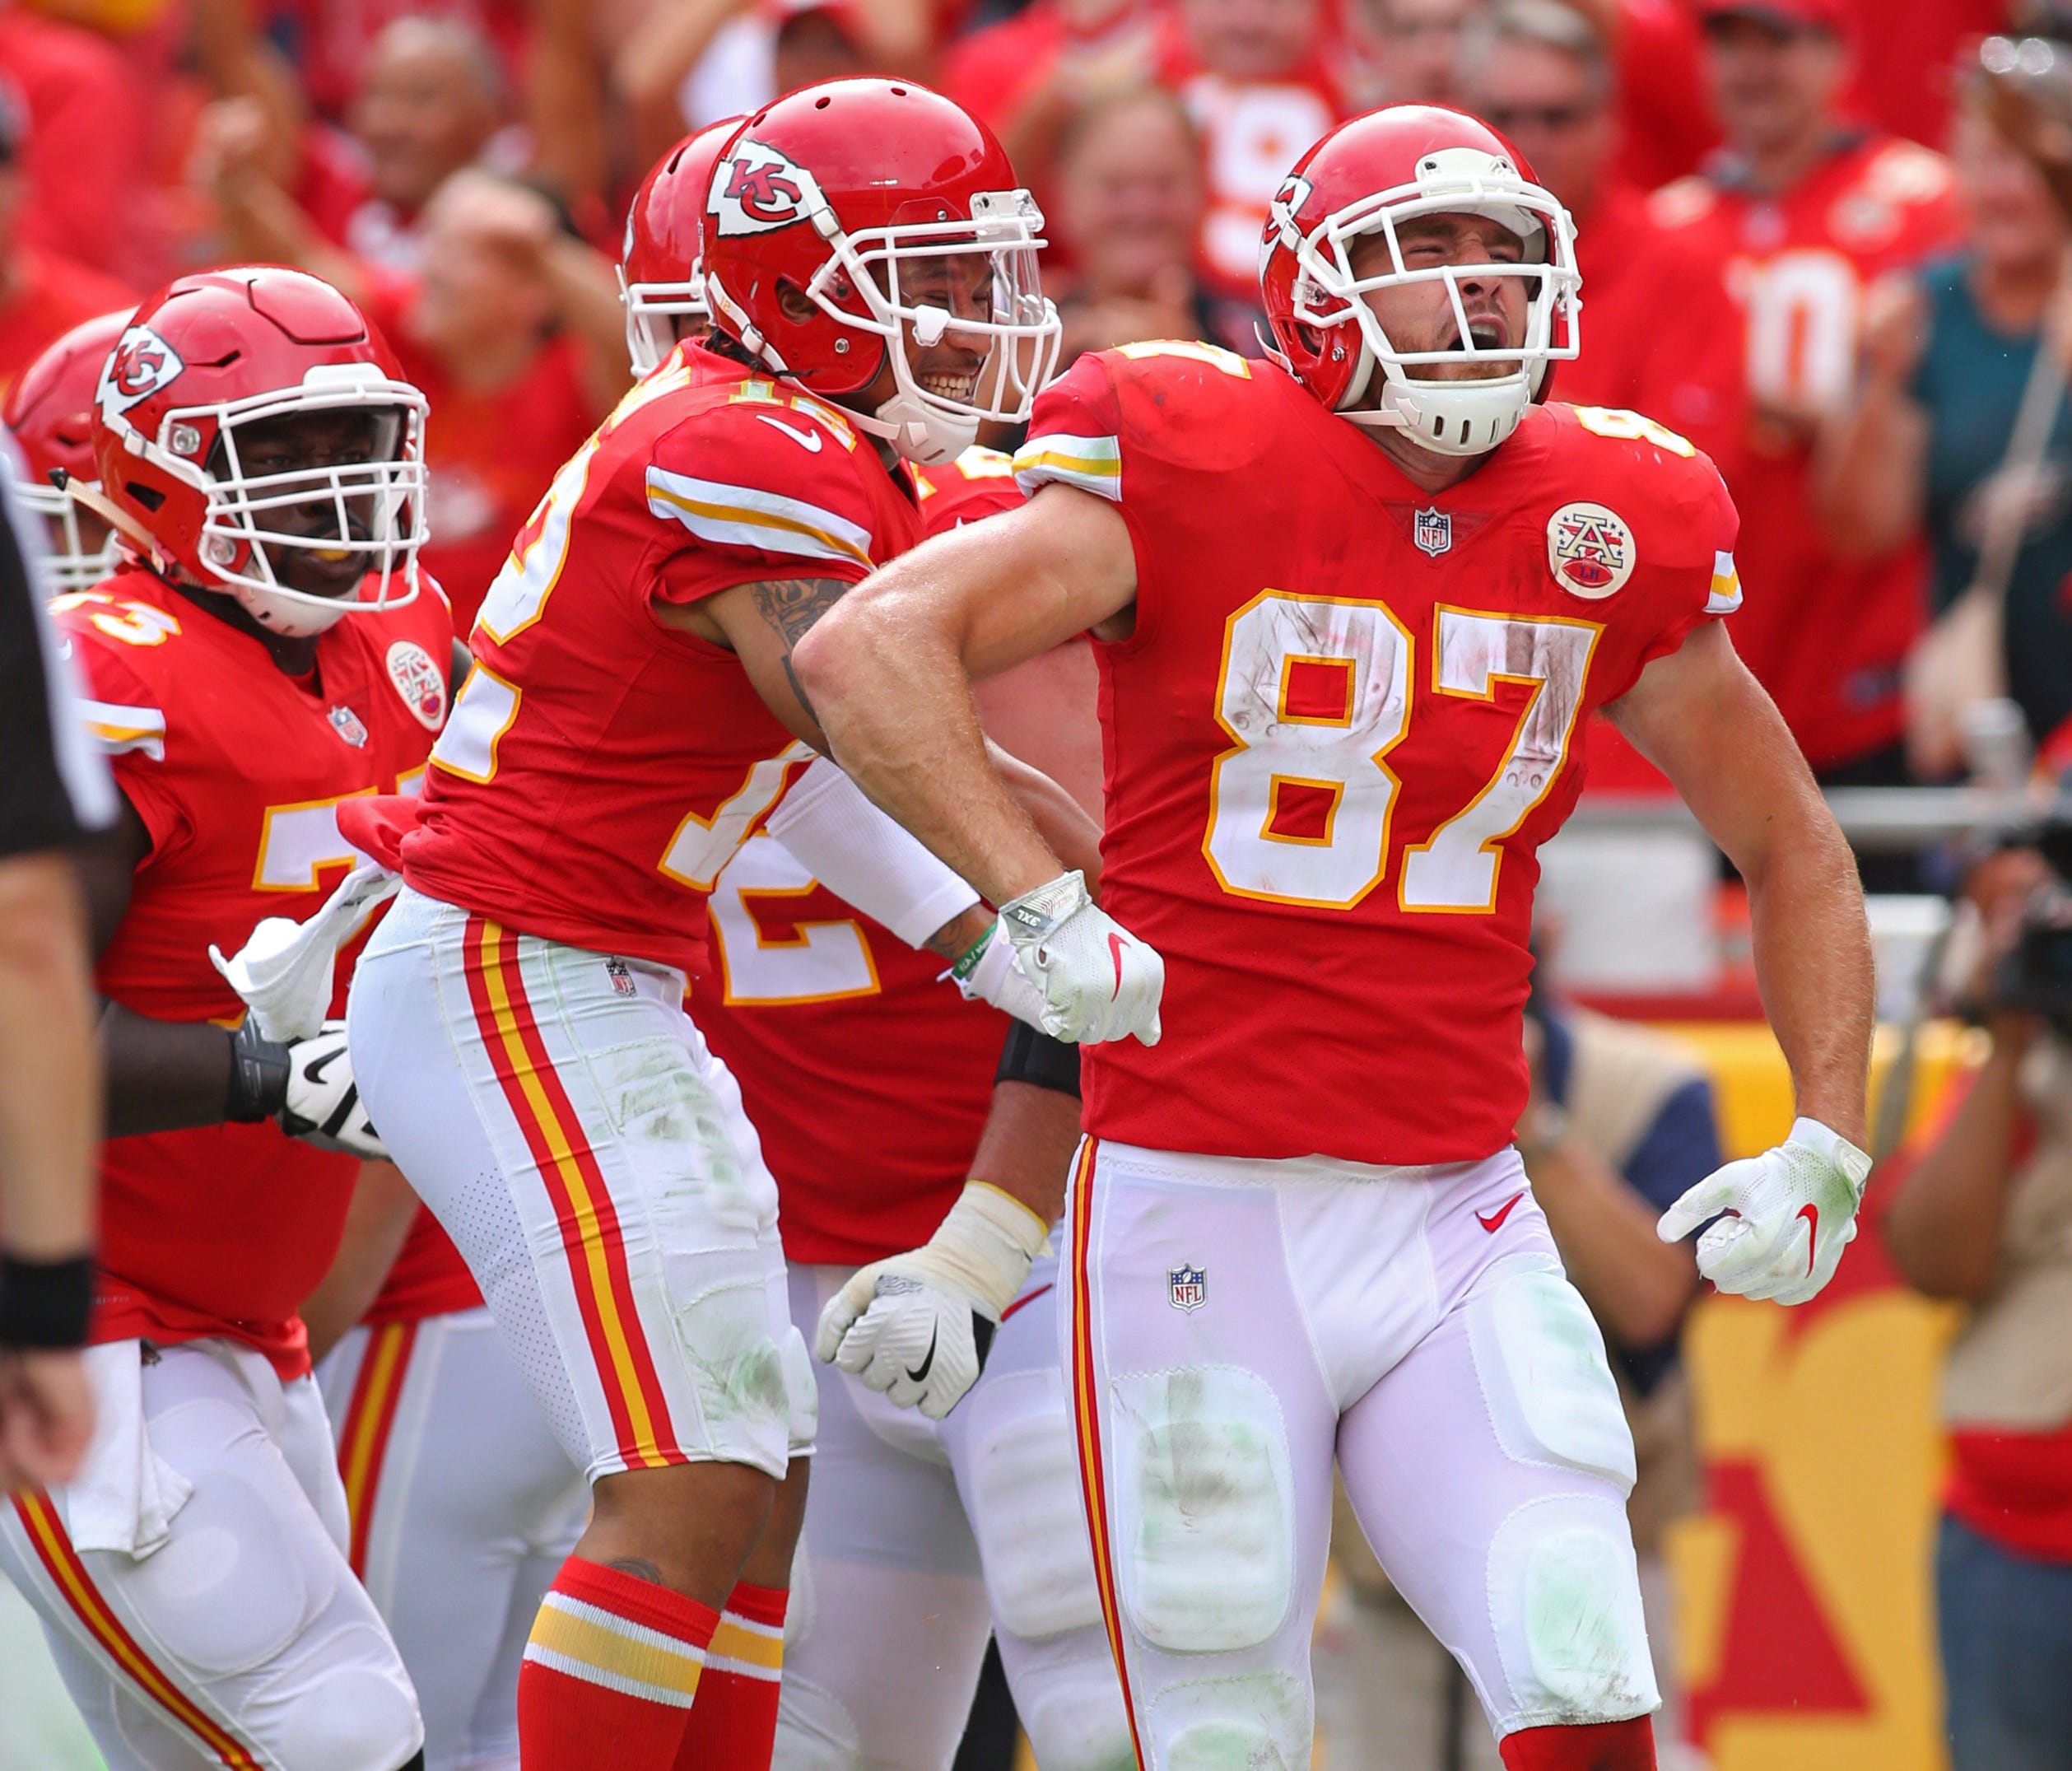 Kansas City Chiefs tight end Travis Kelce (87) celebrates after scoring a touchdown against the Philadelphia Eagles in the second half at Arrowhead Stadium.